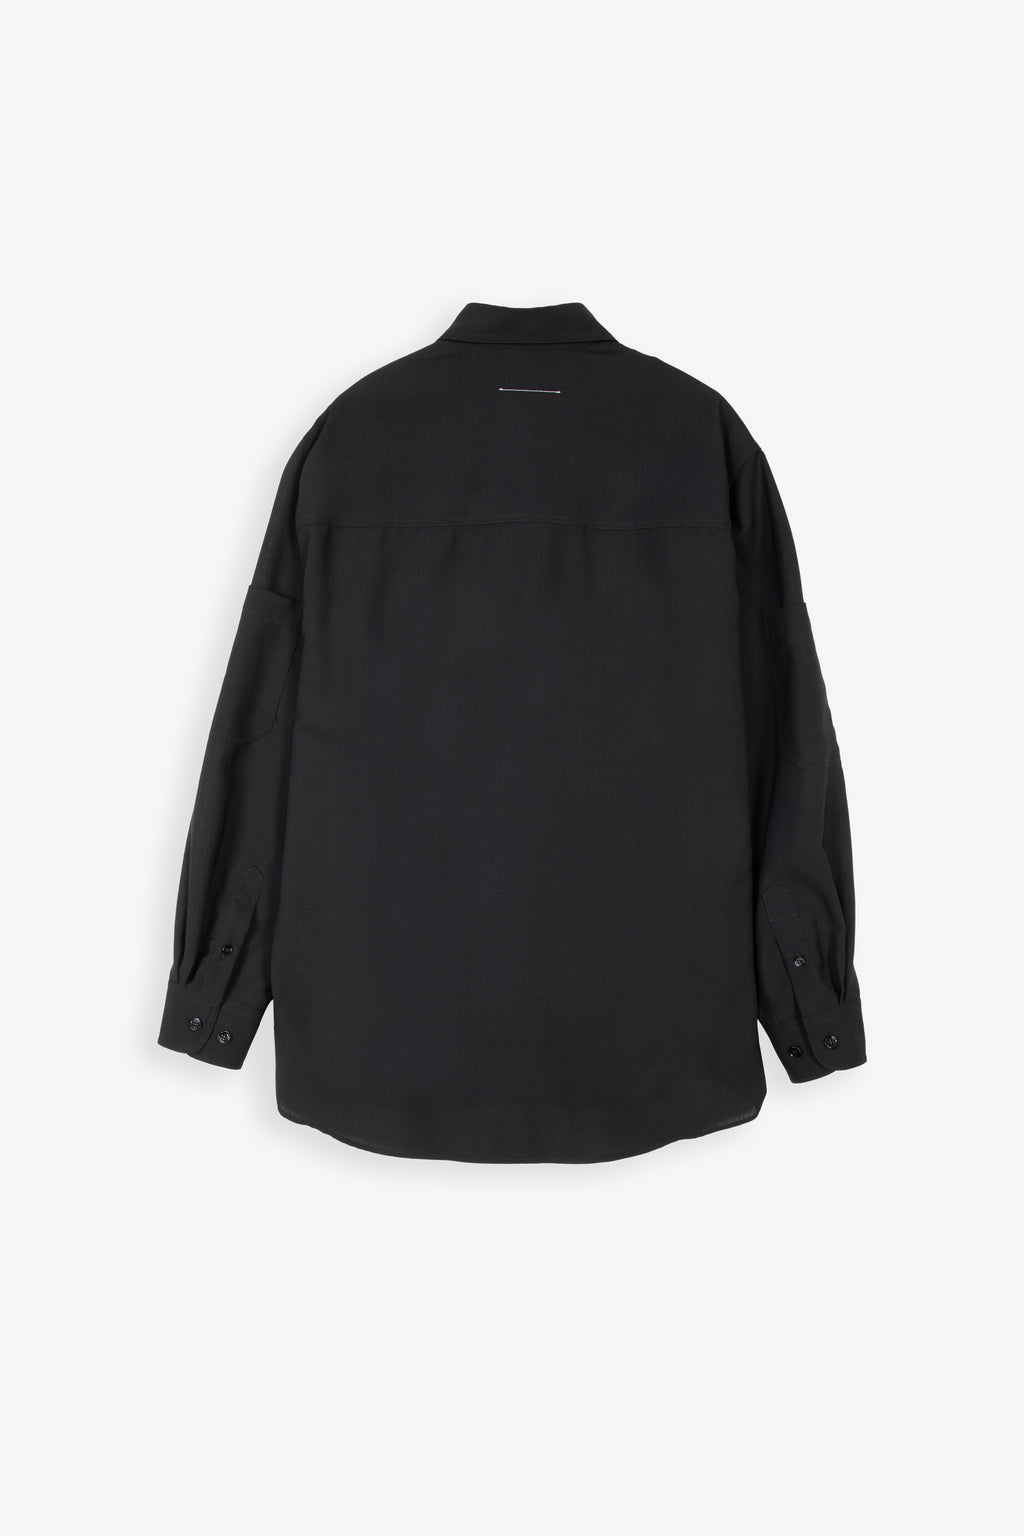 alt-image__Black-wool-shirt-with-front-pockets-